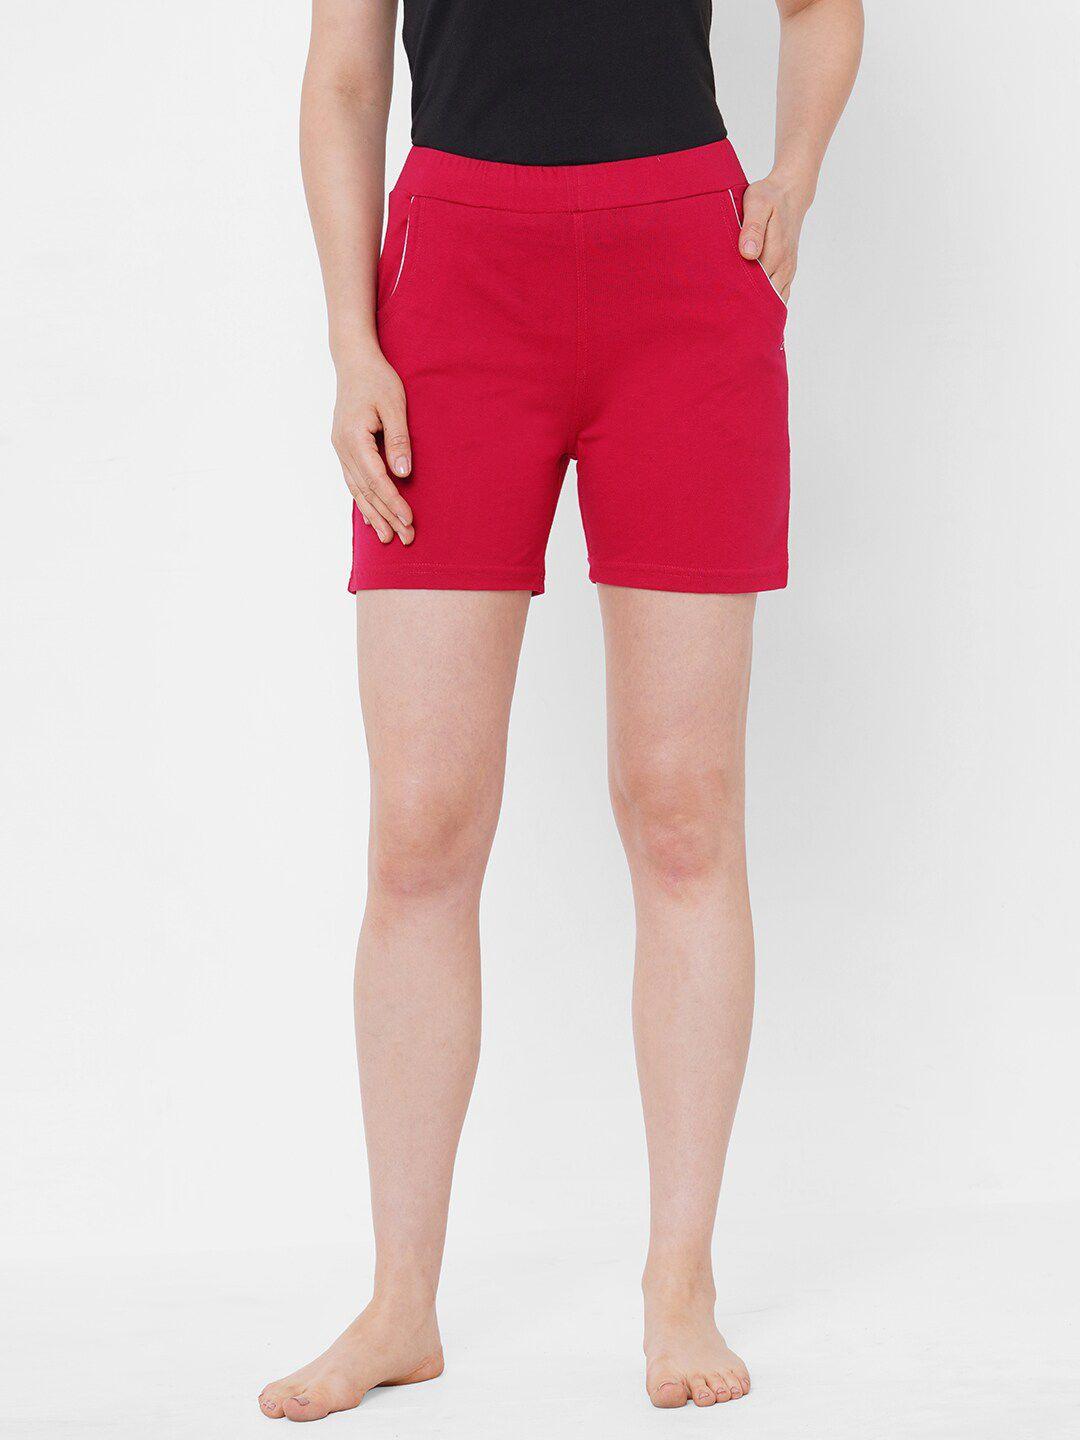 sweet-dreams-women-pink-solid-mid-rise-lounge-shorts